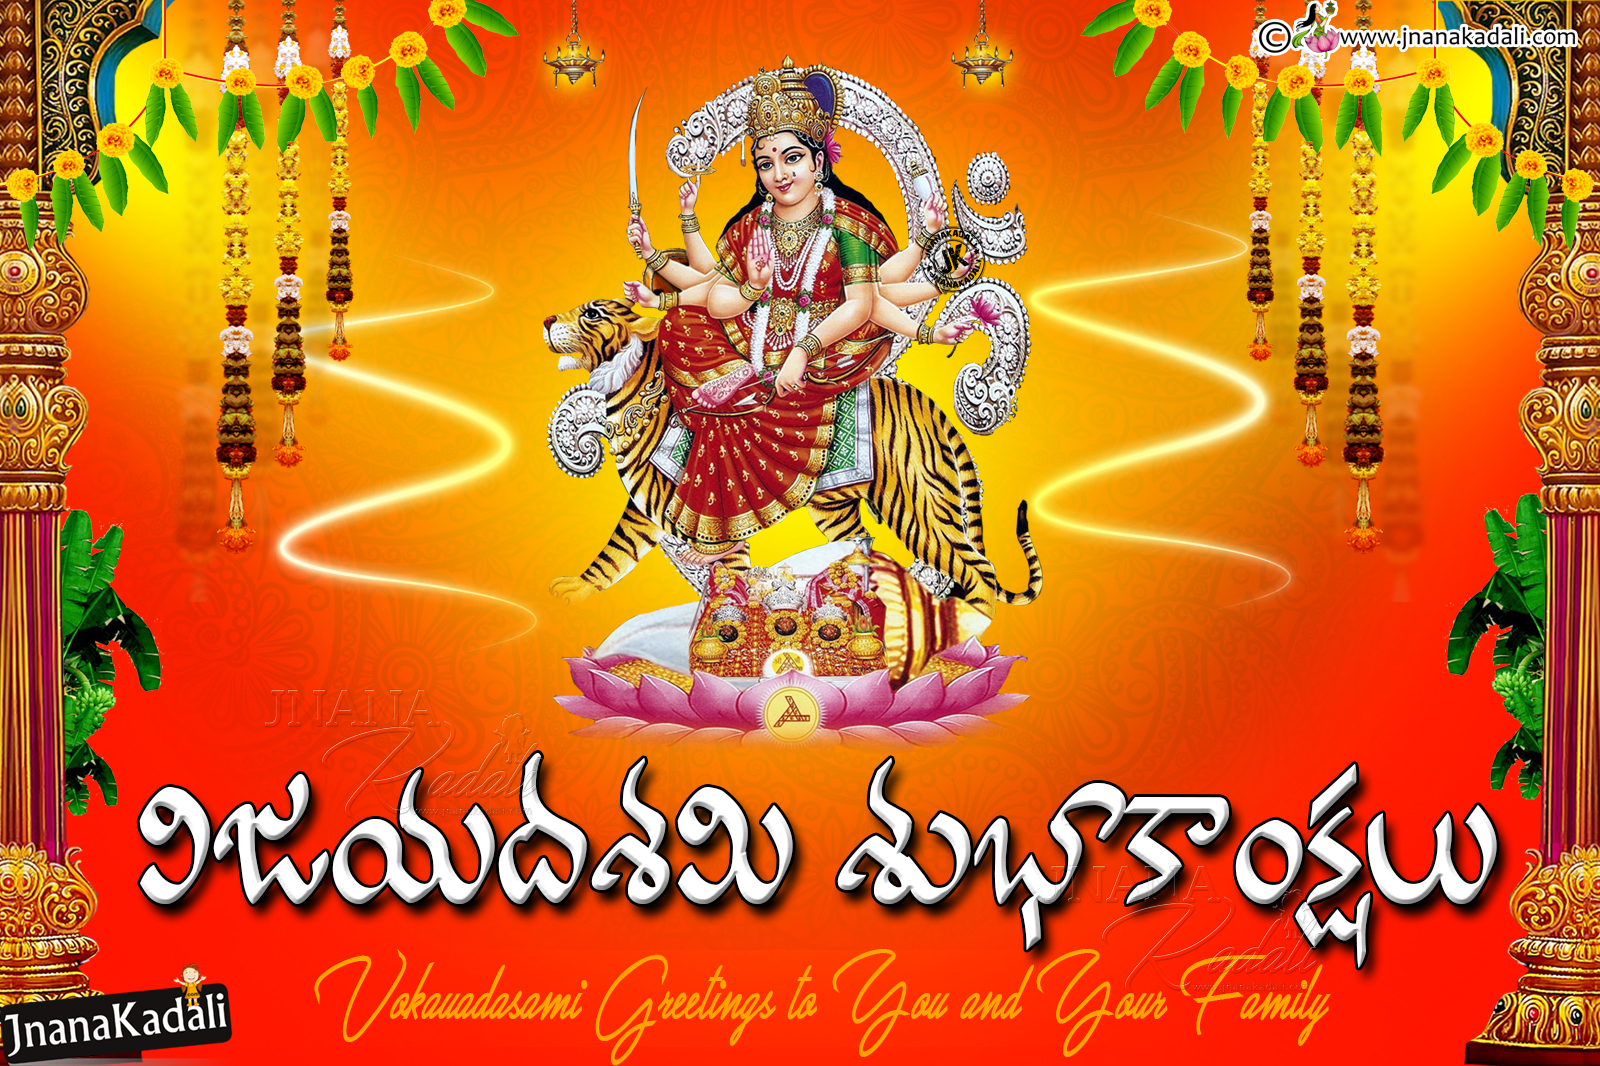 Online Latest Vijayadasami Greetings with Goddess Durga Images in ...